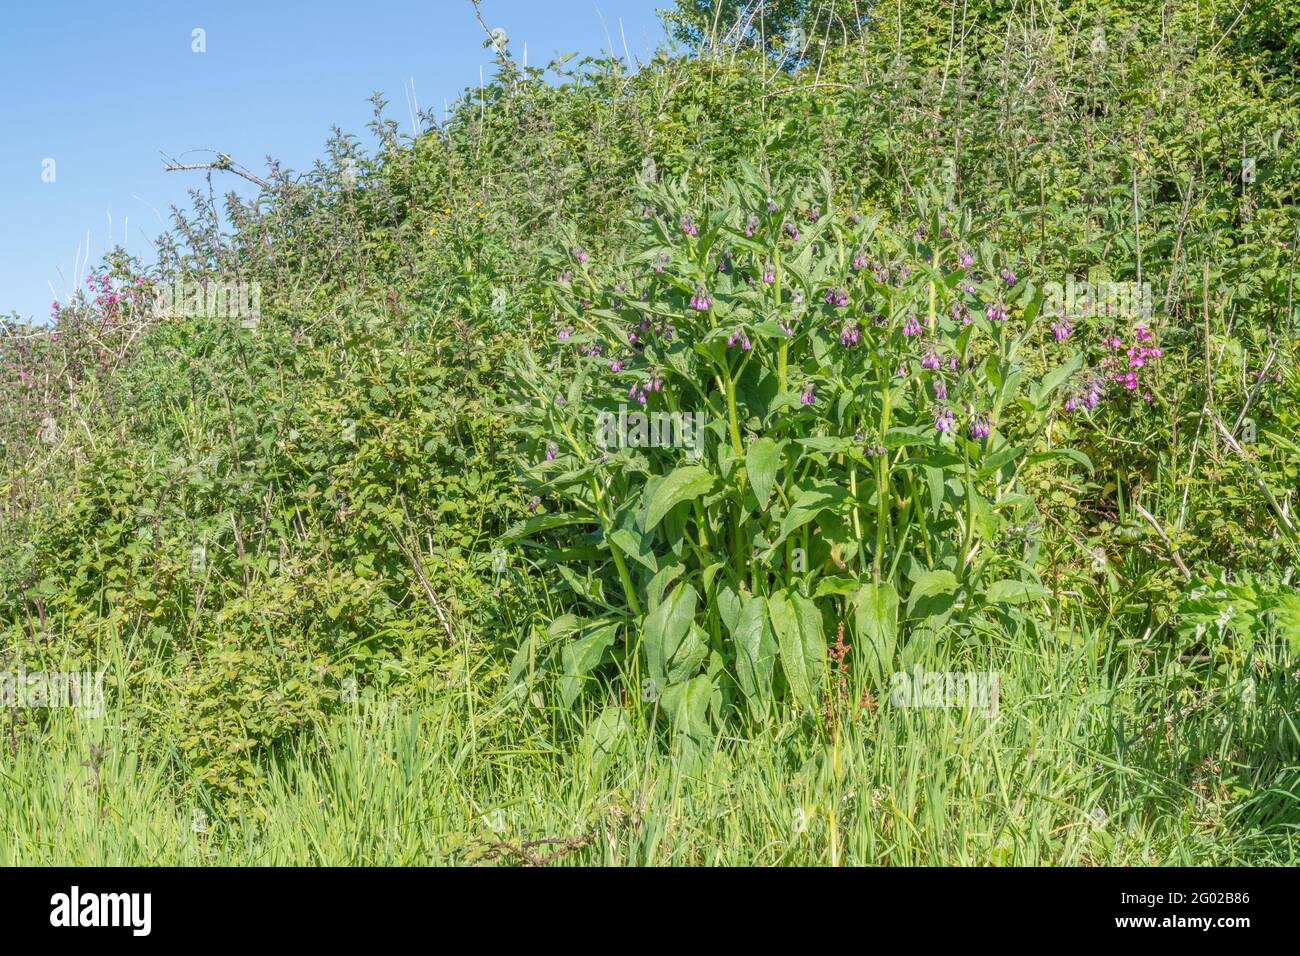 Large clump of medicinal plant Comfrey / Symphytum officinale growing wild, in bright sunshine. Well-known medicinal plant used in herbal remedies. Stock Photo